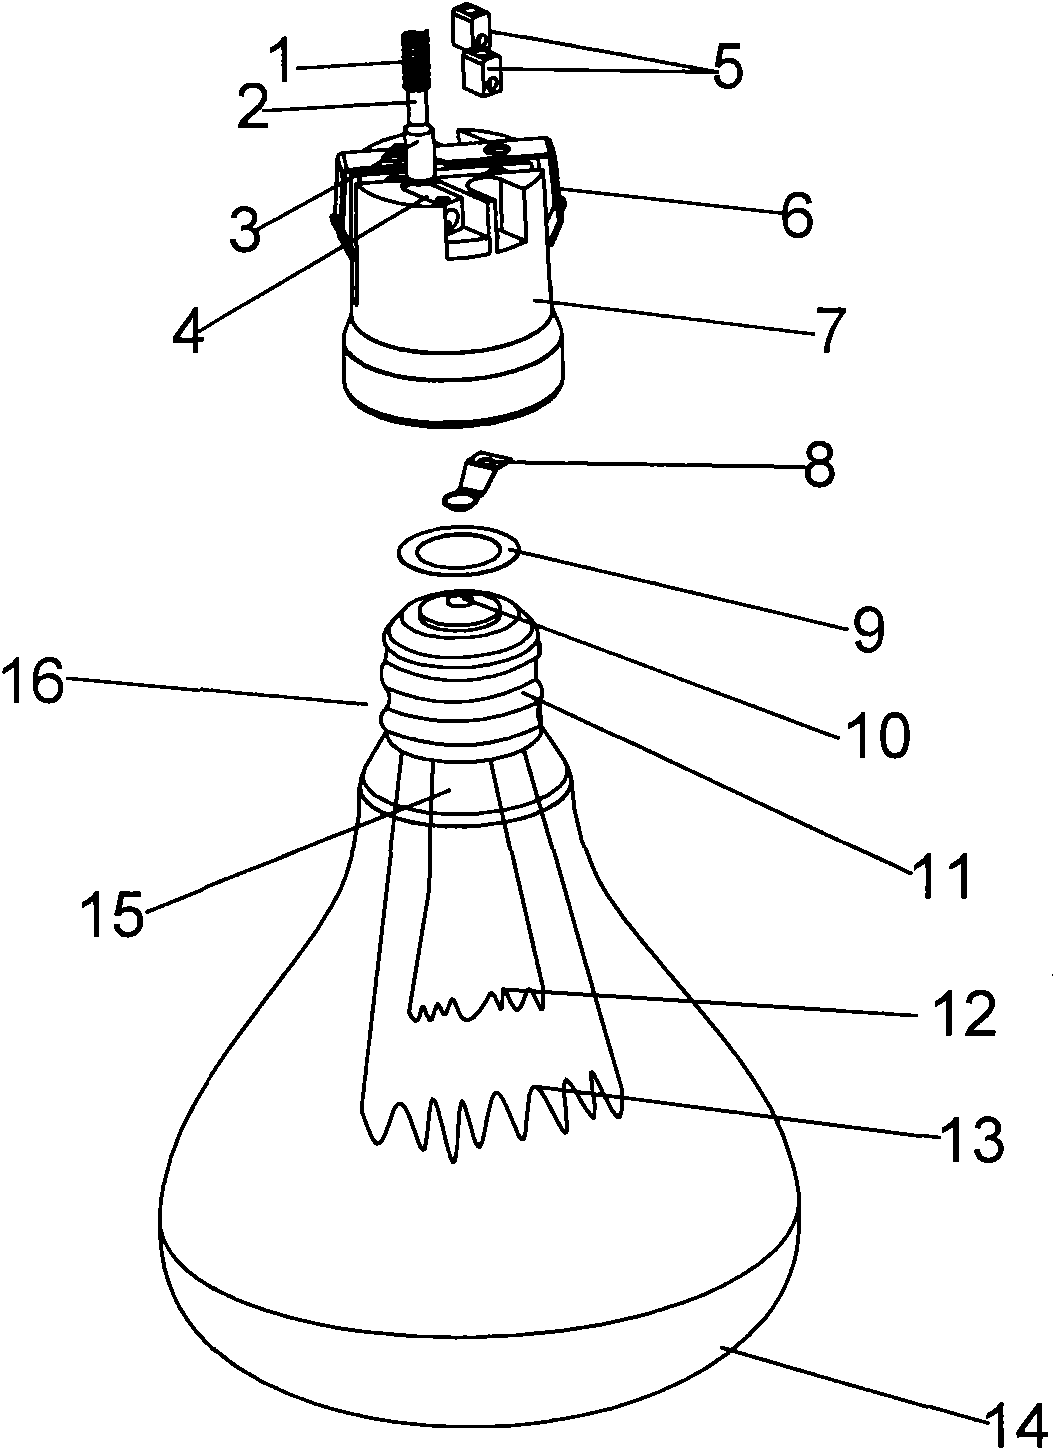 Double-power warming lamp